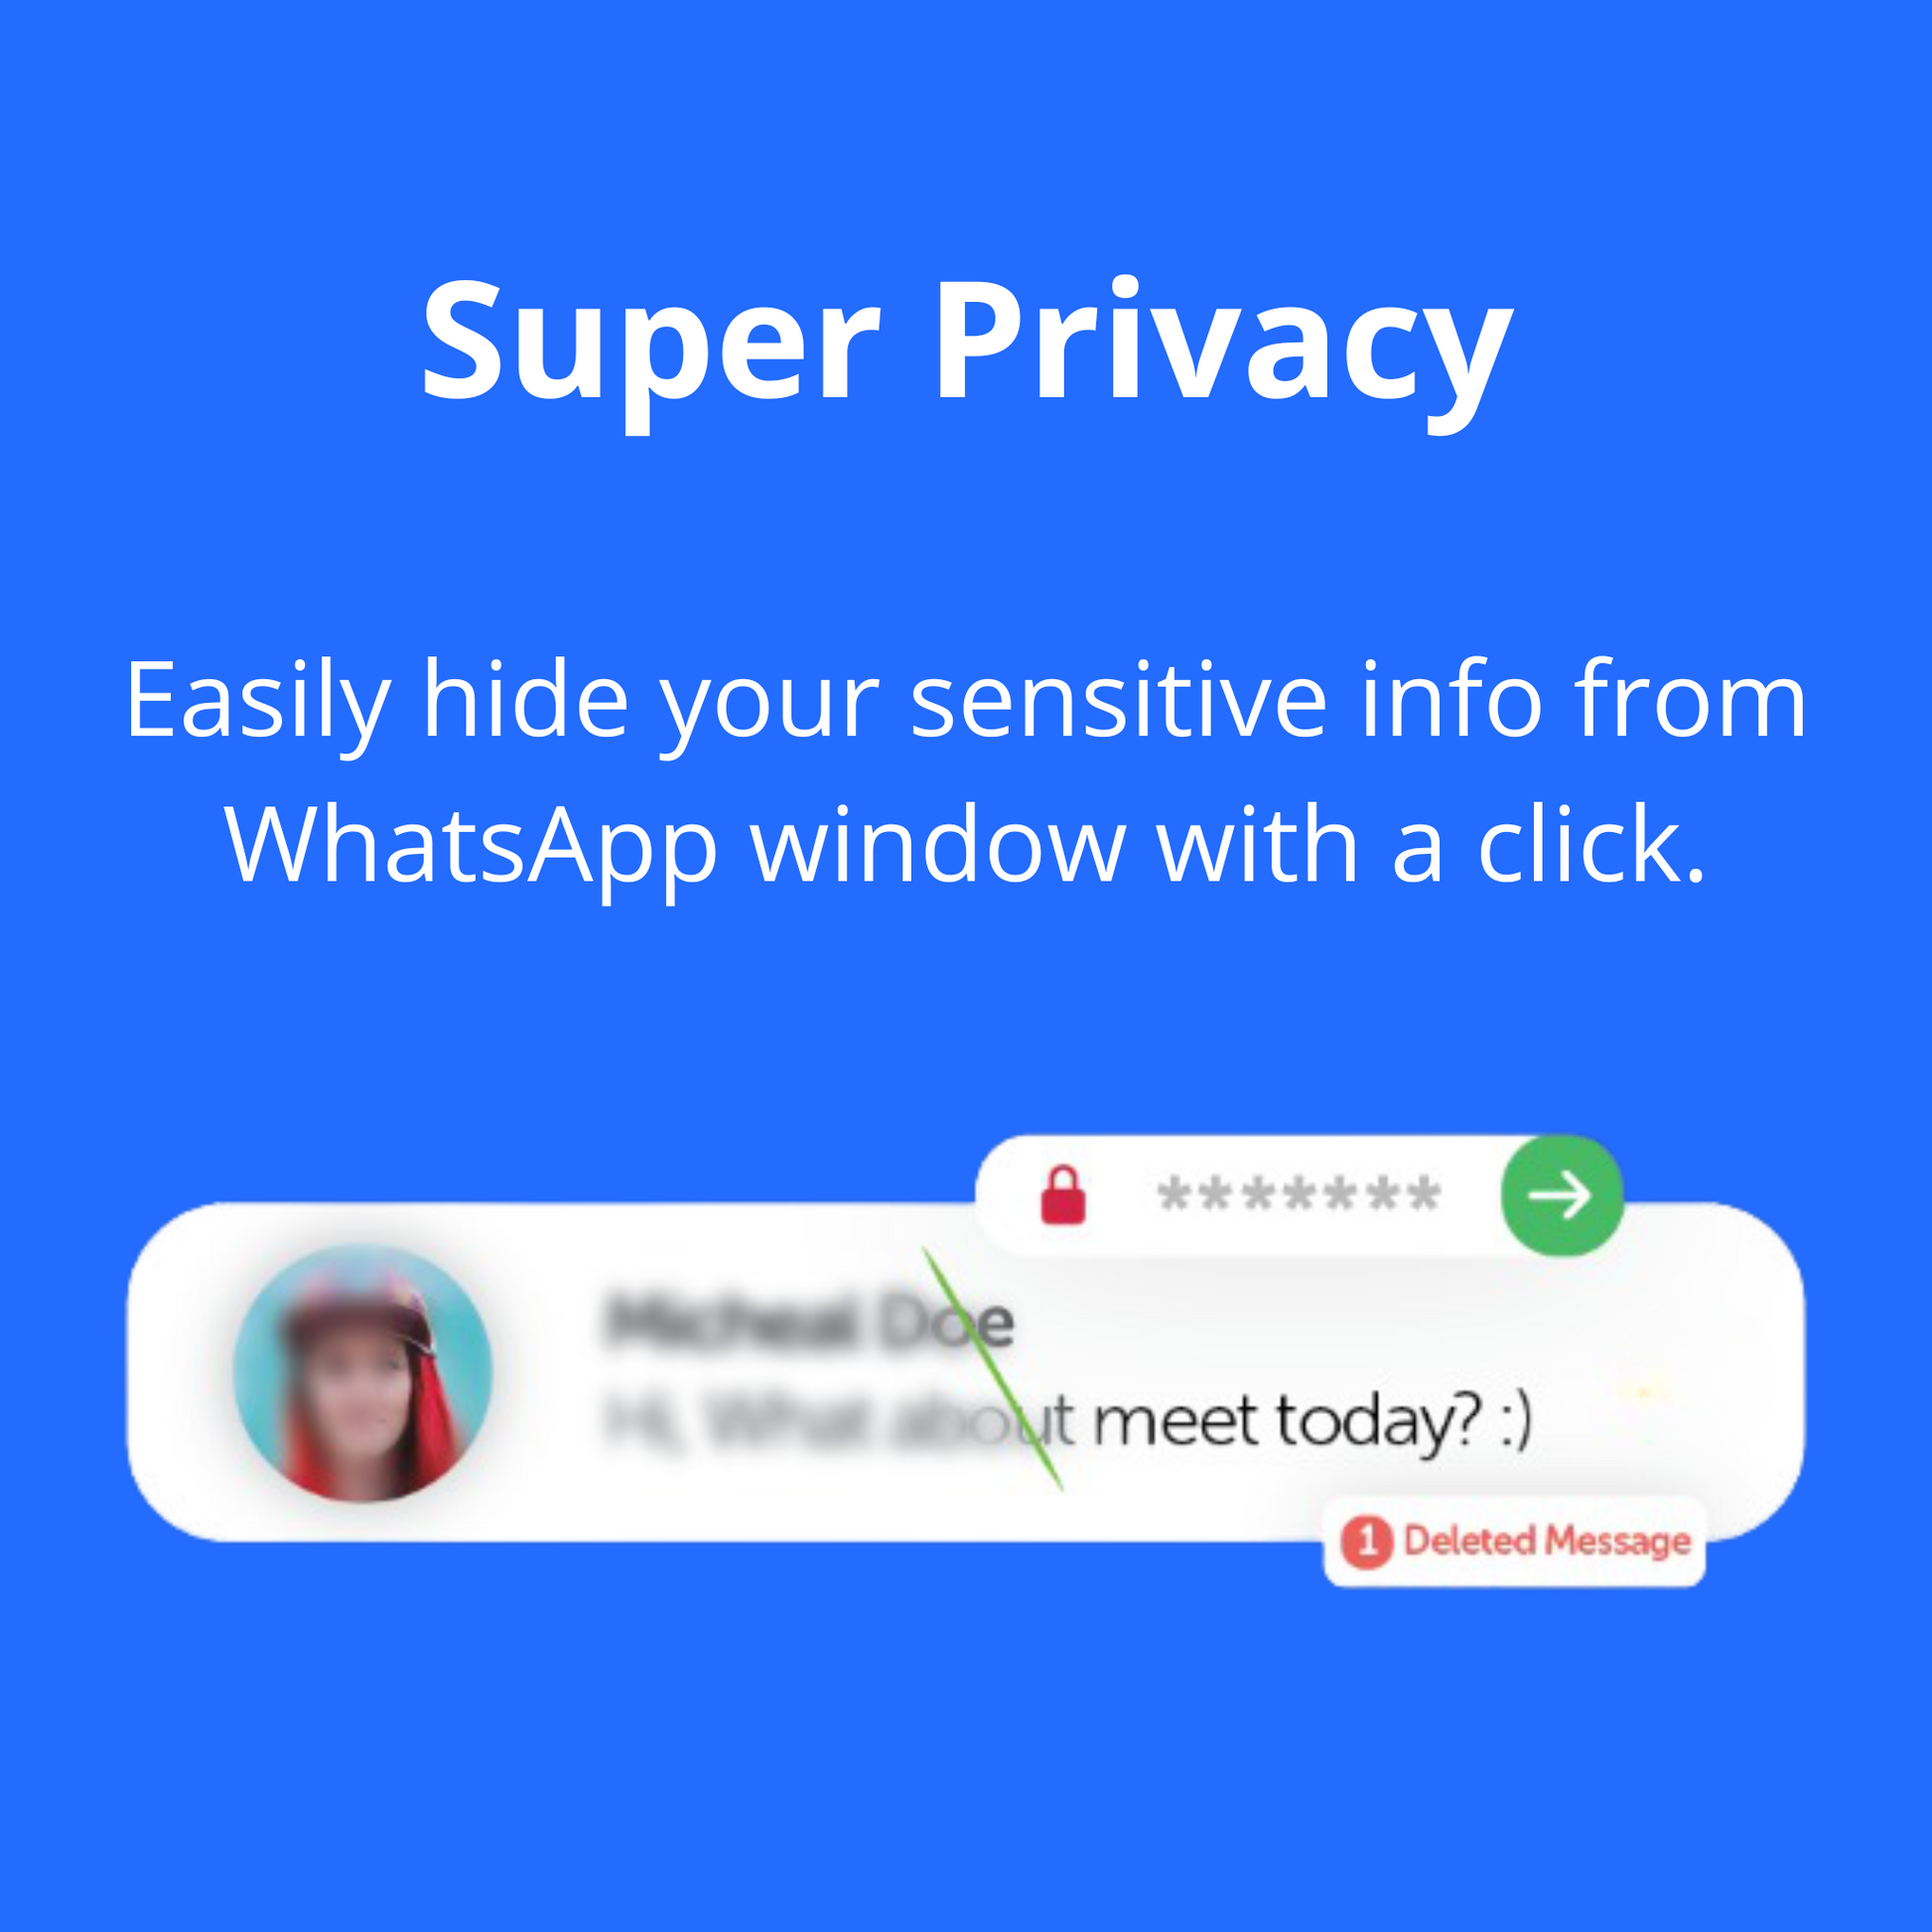 Golden Value SG - WA Web Plus (3 Months Plan) - Automate your WhatsApp tasks: Super privacy - hide your sensitive from whatsapp window with a click.